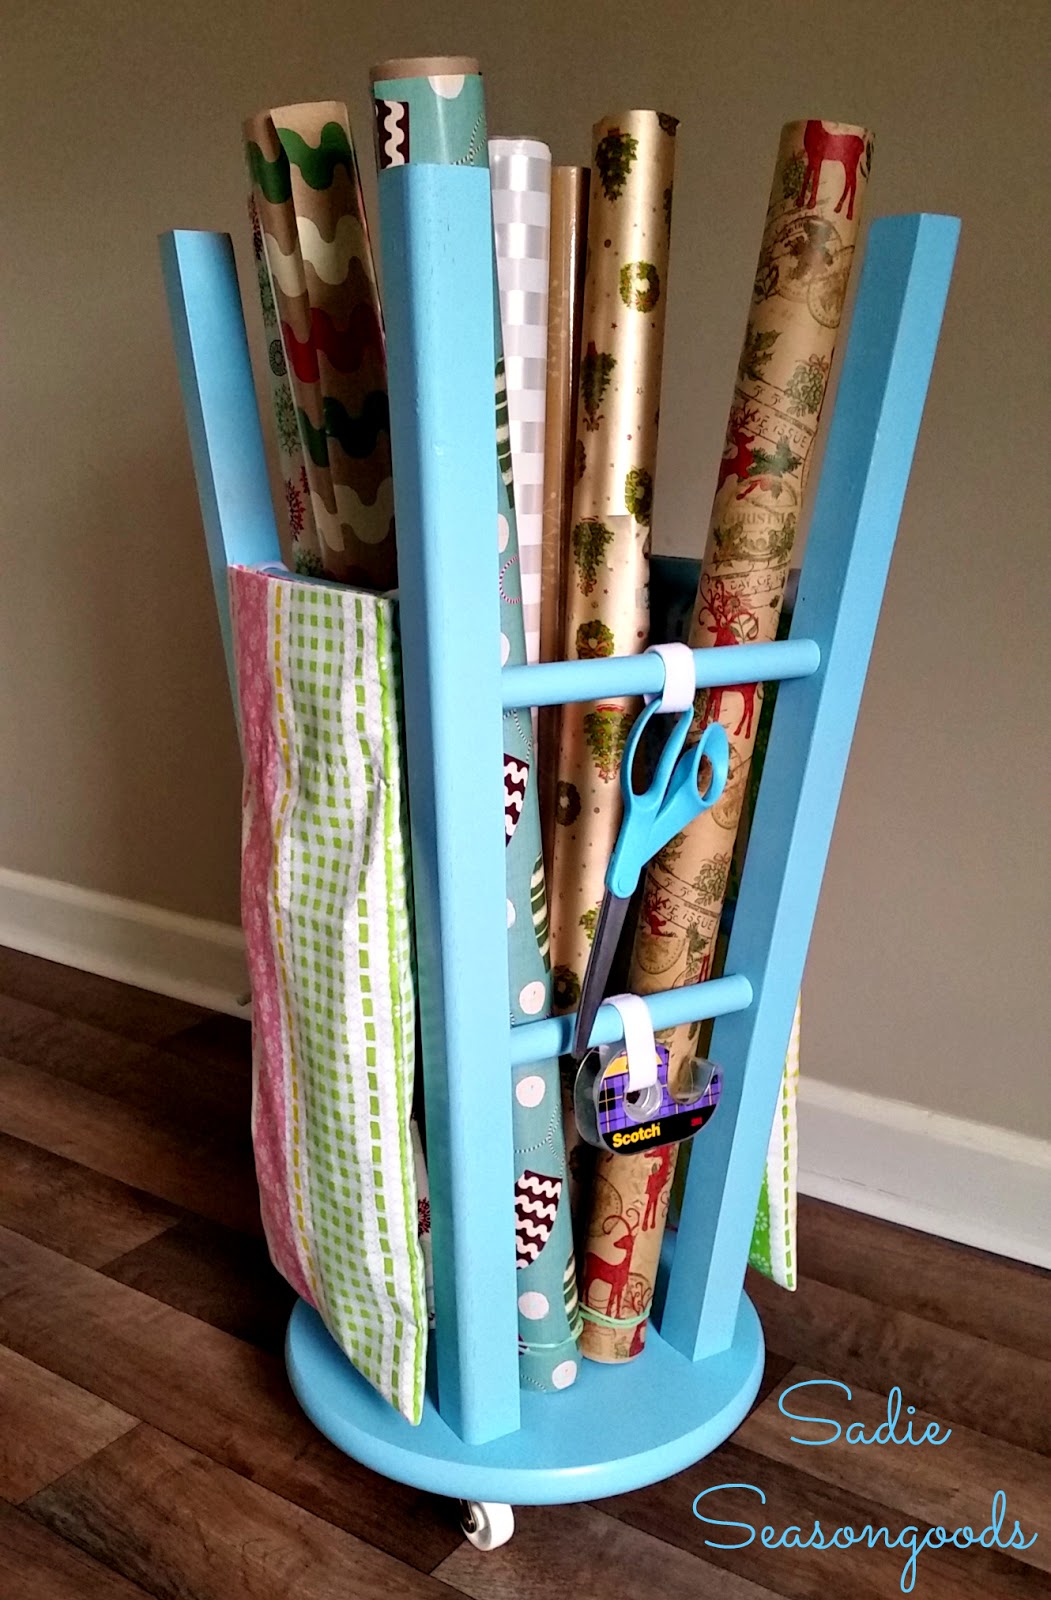 10 Upcycled, Recycled, and Repurposed Craft Room Storage Ideas - Little